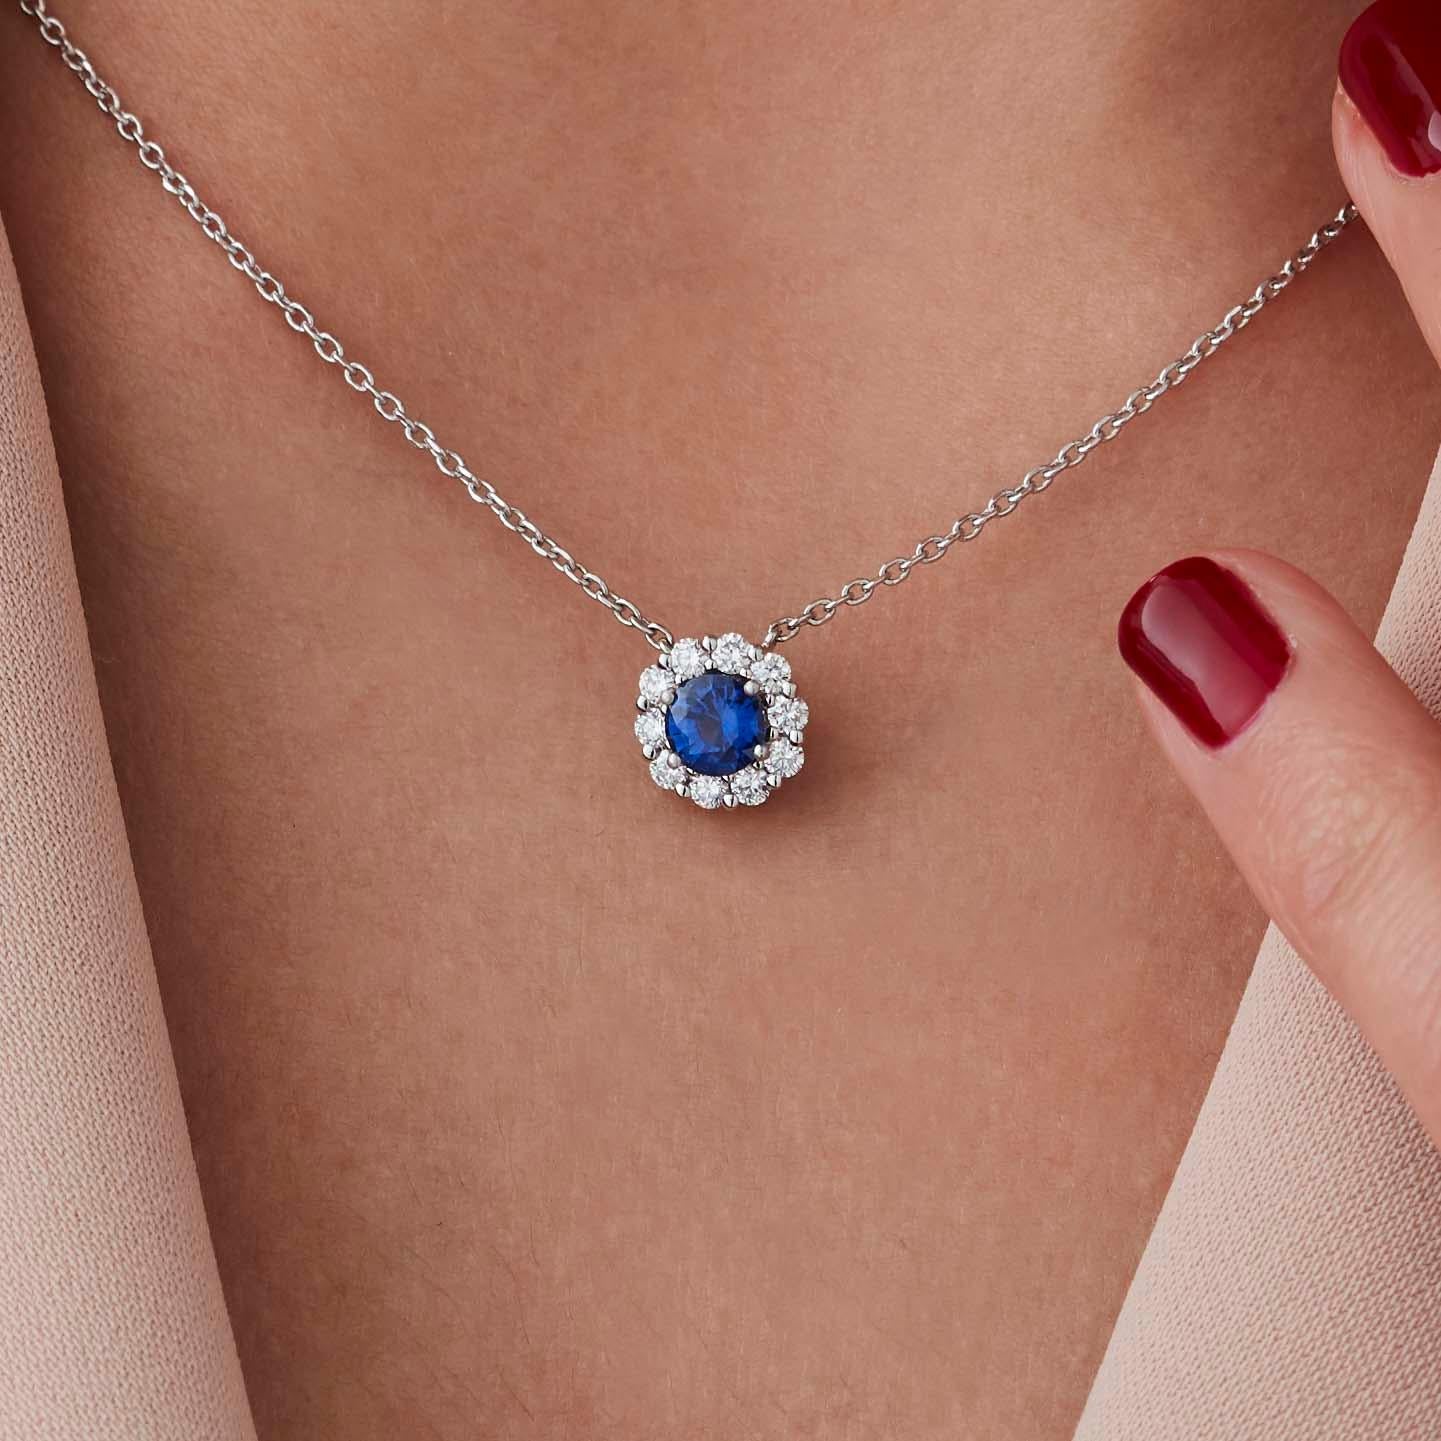 A House of Garrard platinum pendant from the 'Garrard 1735' collection, set with a central round blue sapphire and round white diamonds.

10 round white diamonds weighing: 0.35cts
1 round blue sapphire weighing: 0.65cts
GIA Certified, Sri Lanka,